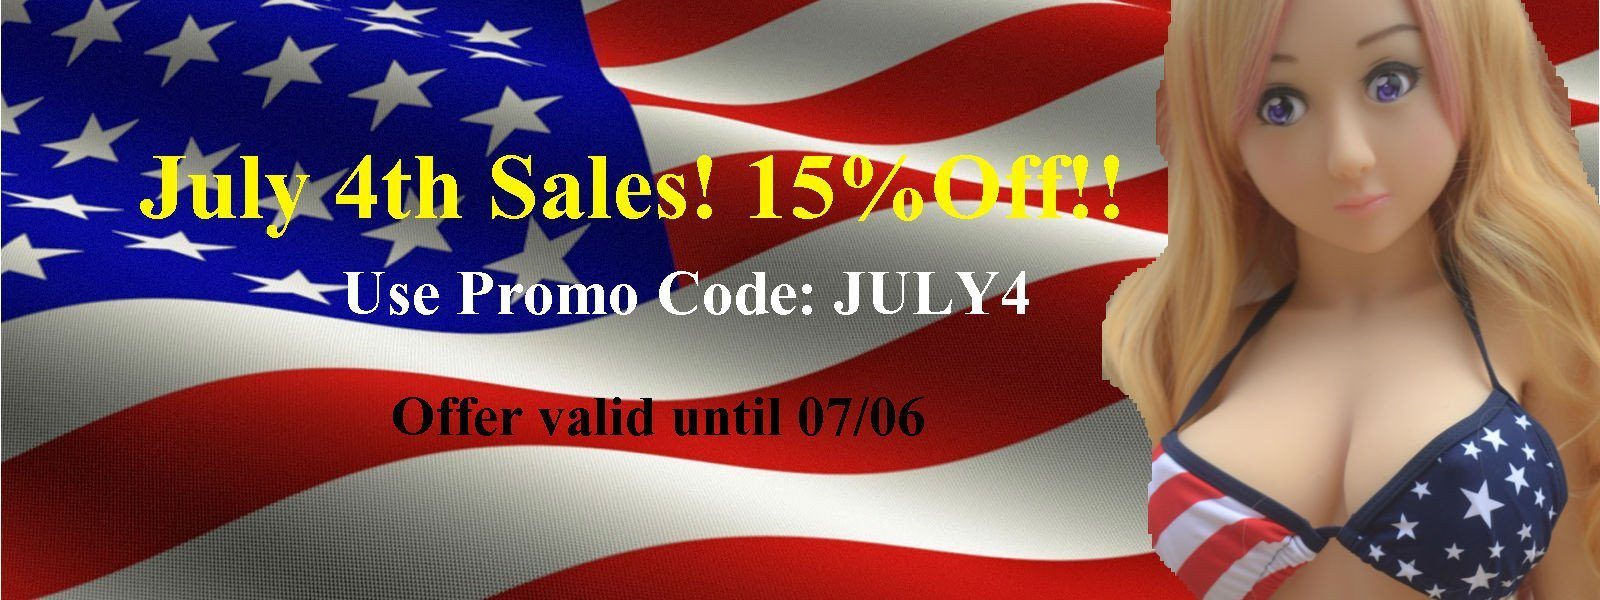 15% Off during 4th of July Weekend!